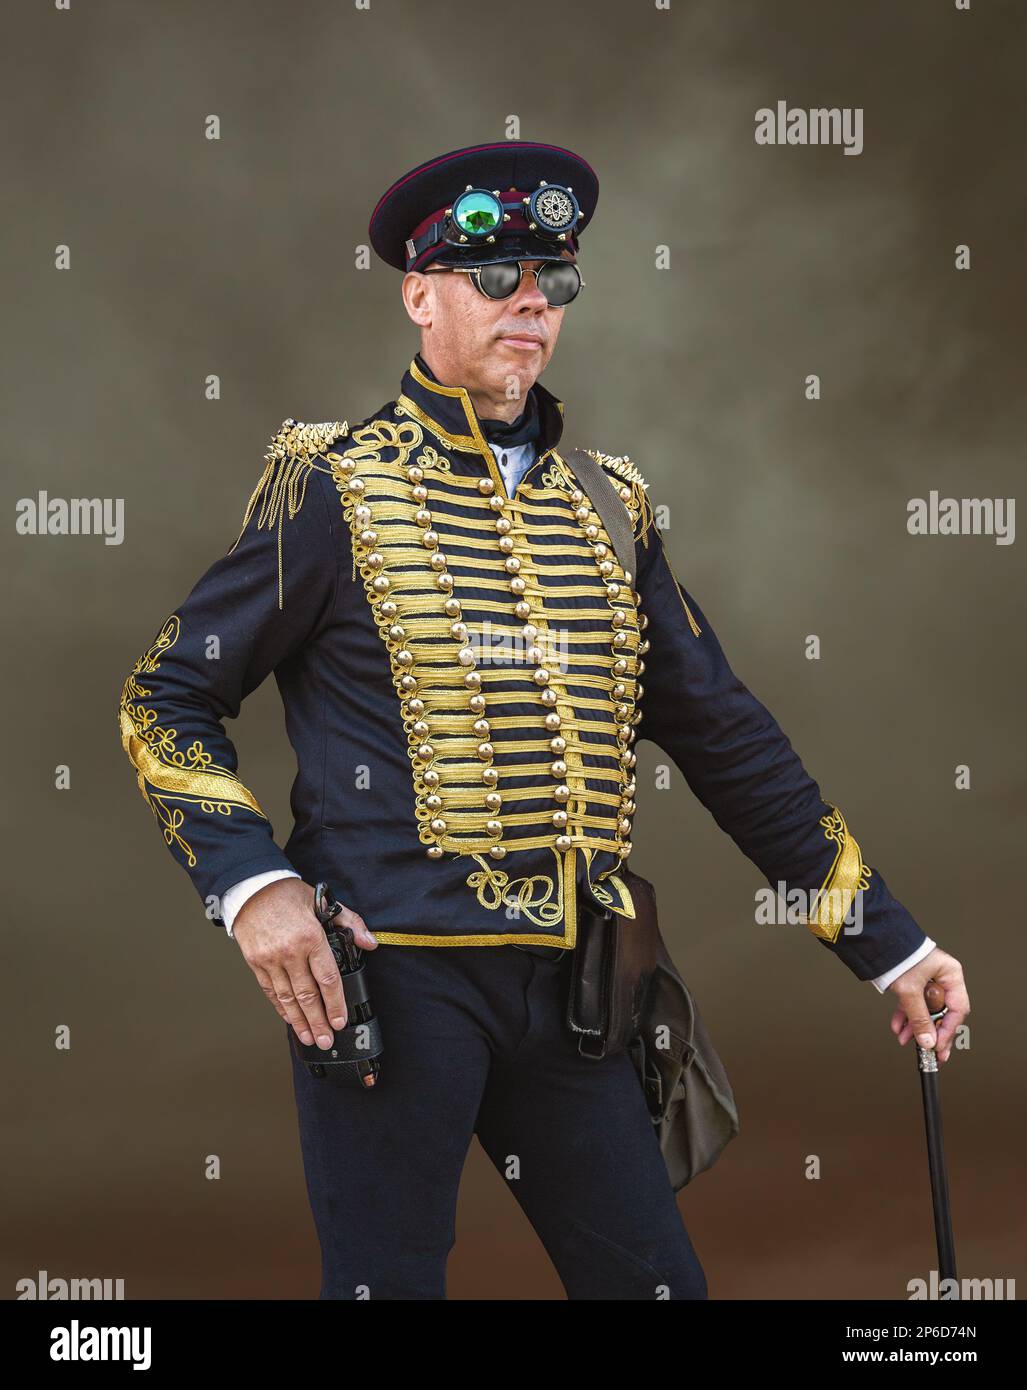 A male steampunk wearing a pseudo military officer's uniform and holding a cane. Stock Photo